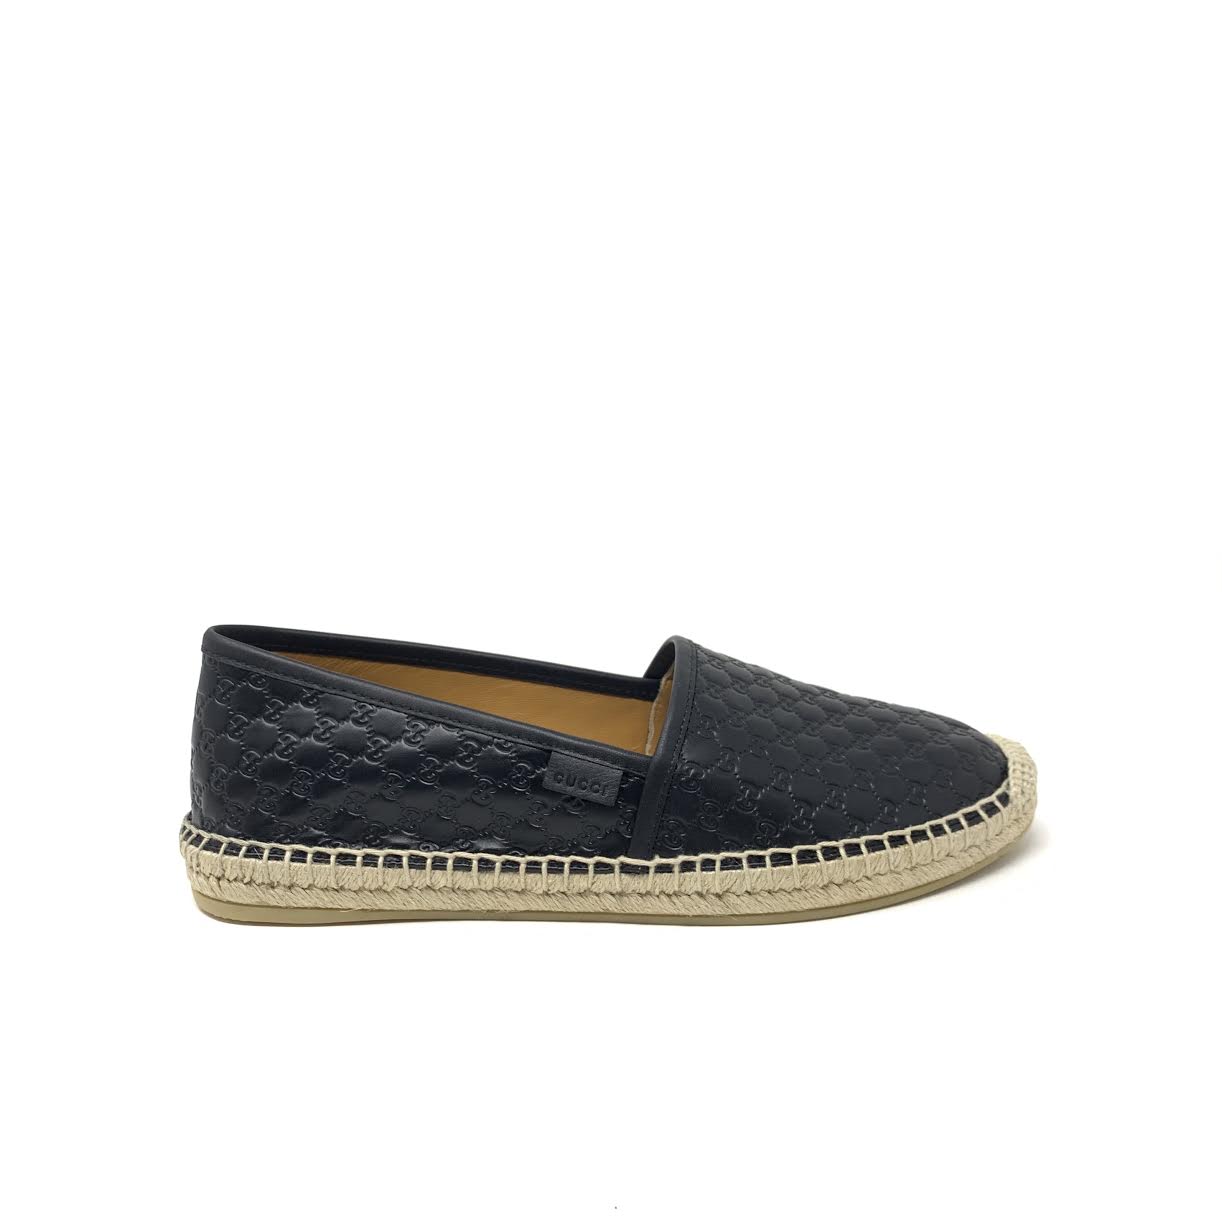 Charles Keasing rulletrappe bånd Gucci Black Guccissima GG Leather Espadrilles - Size 38.5